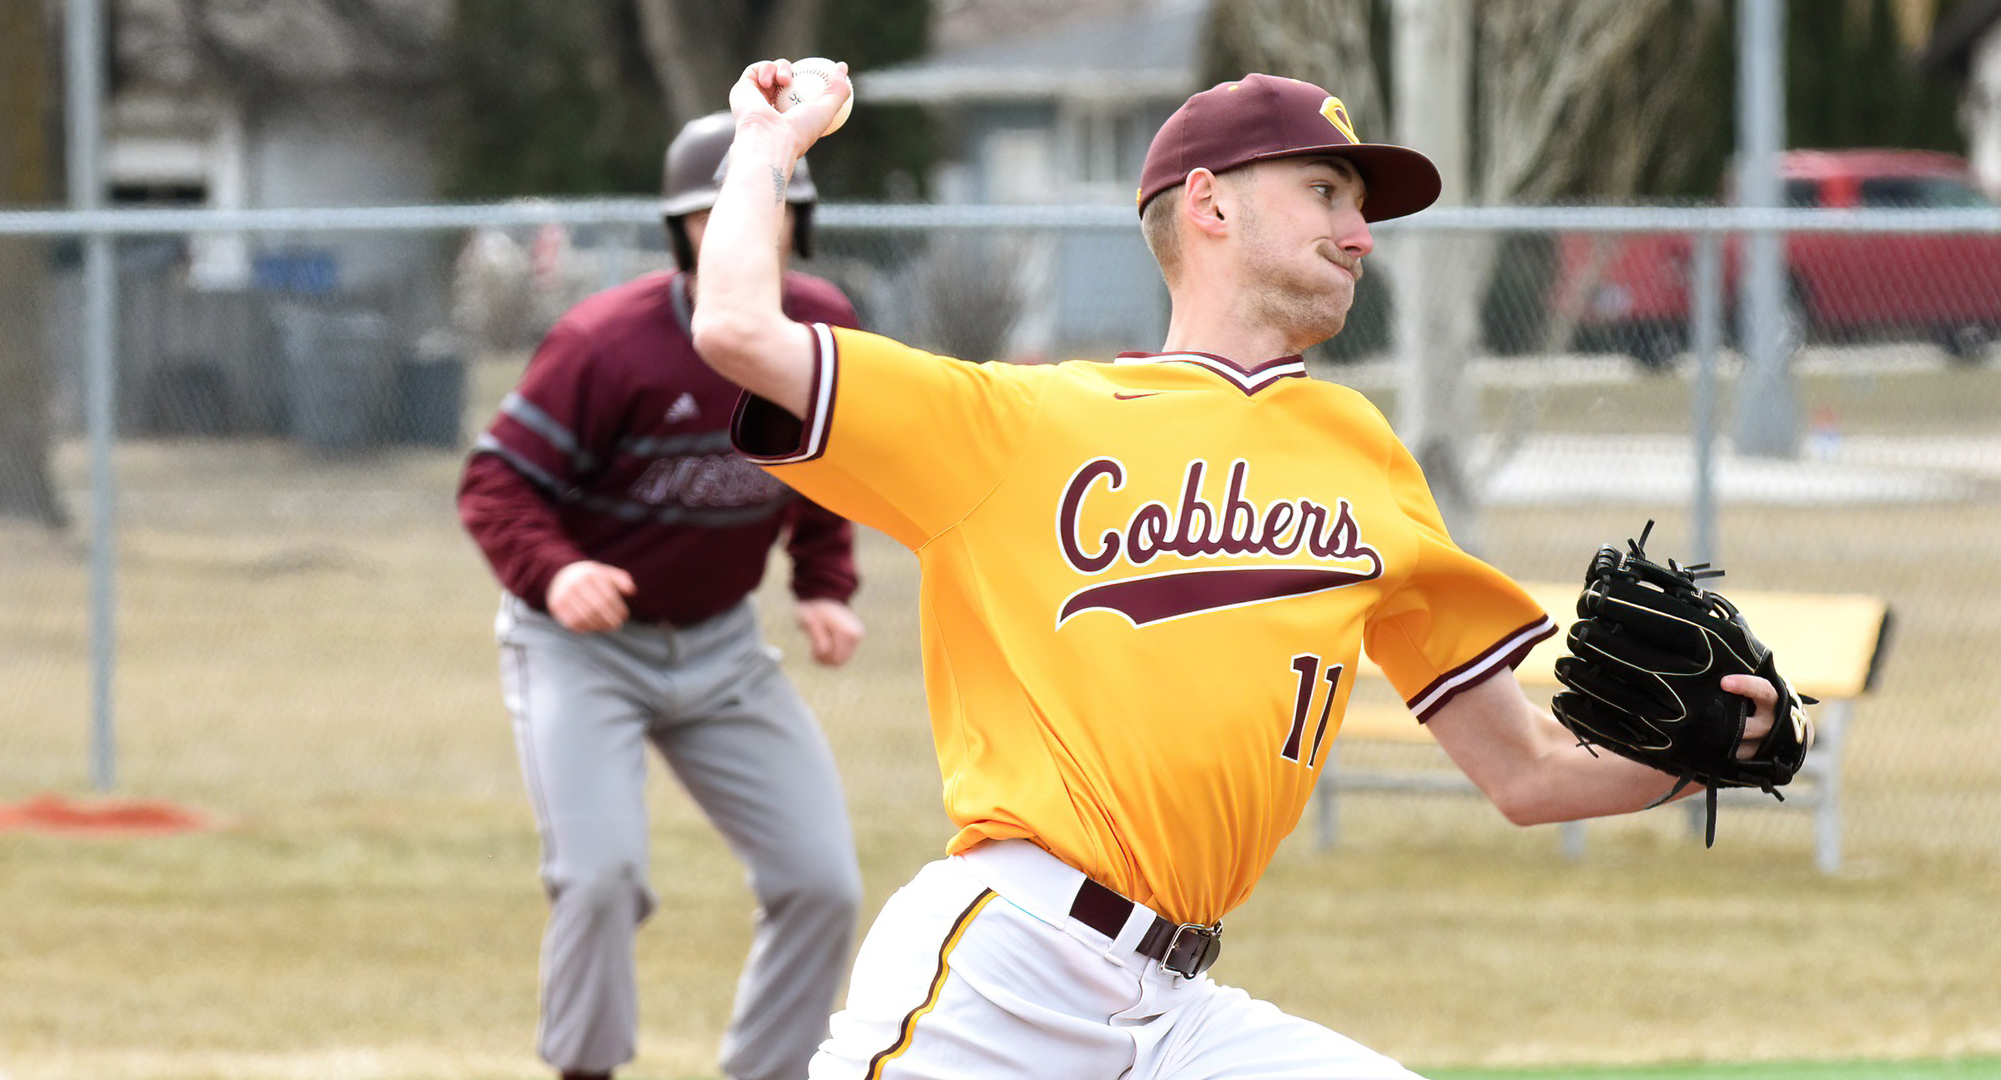 Senior Ashwin Stratton pitched a complete game, and only allowed four runs, in the Cobbers' opener against Farmingdale State.